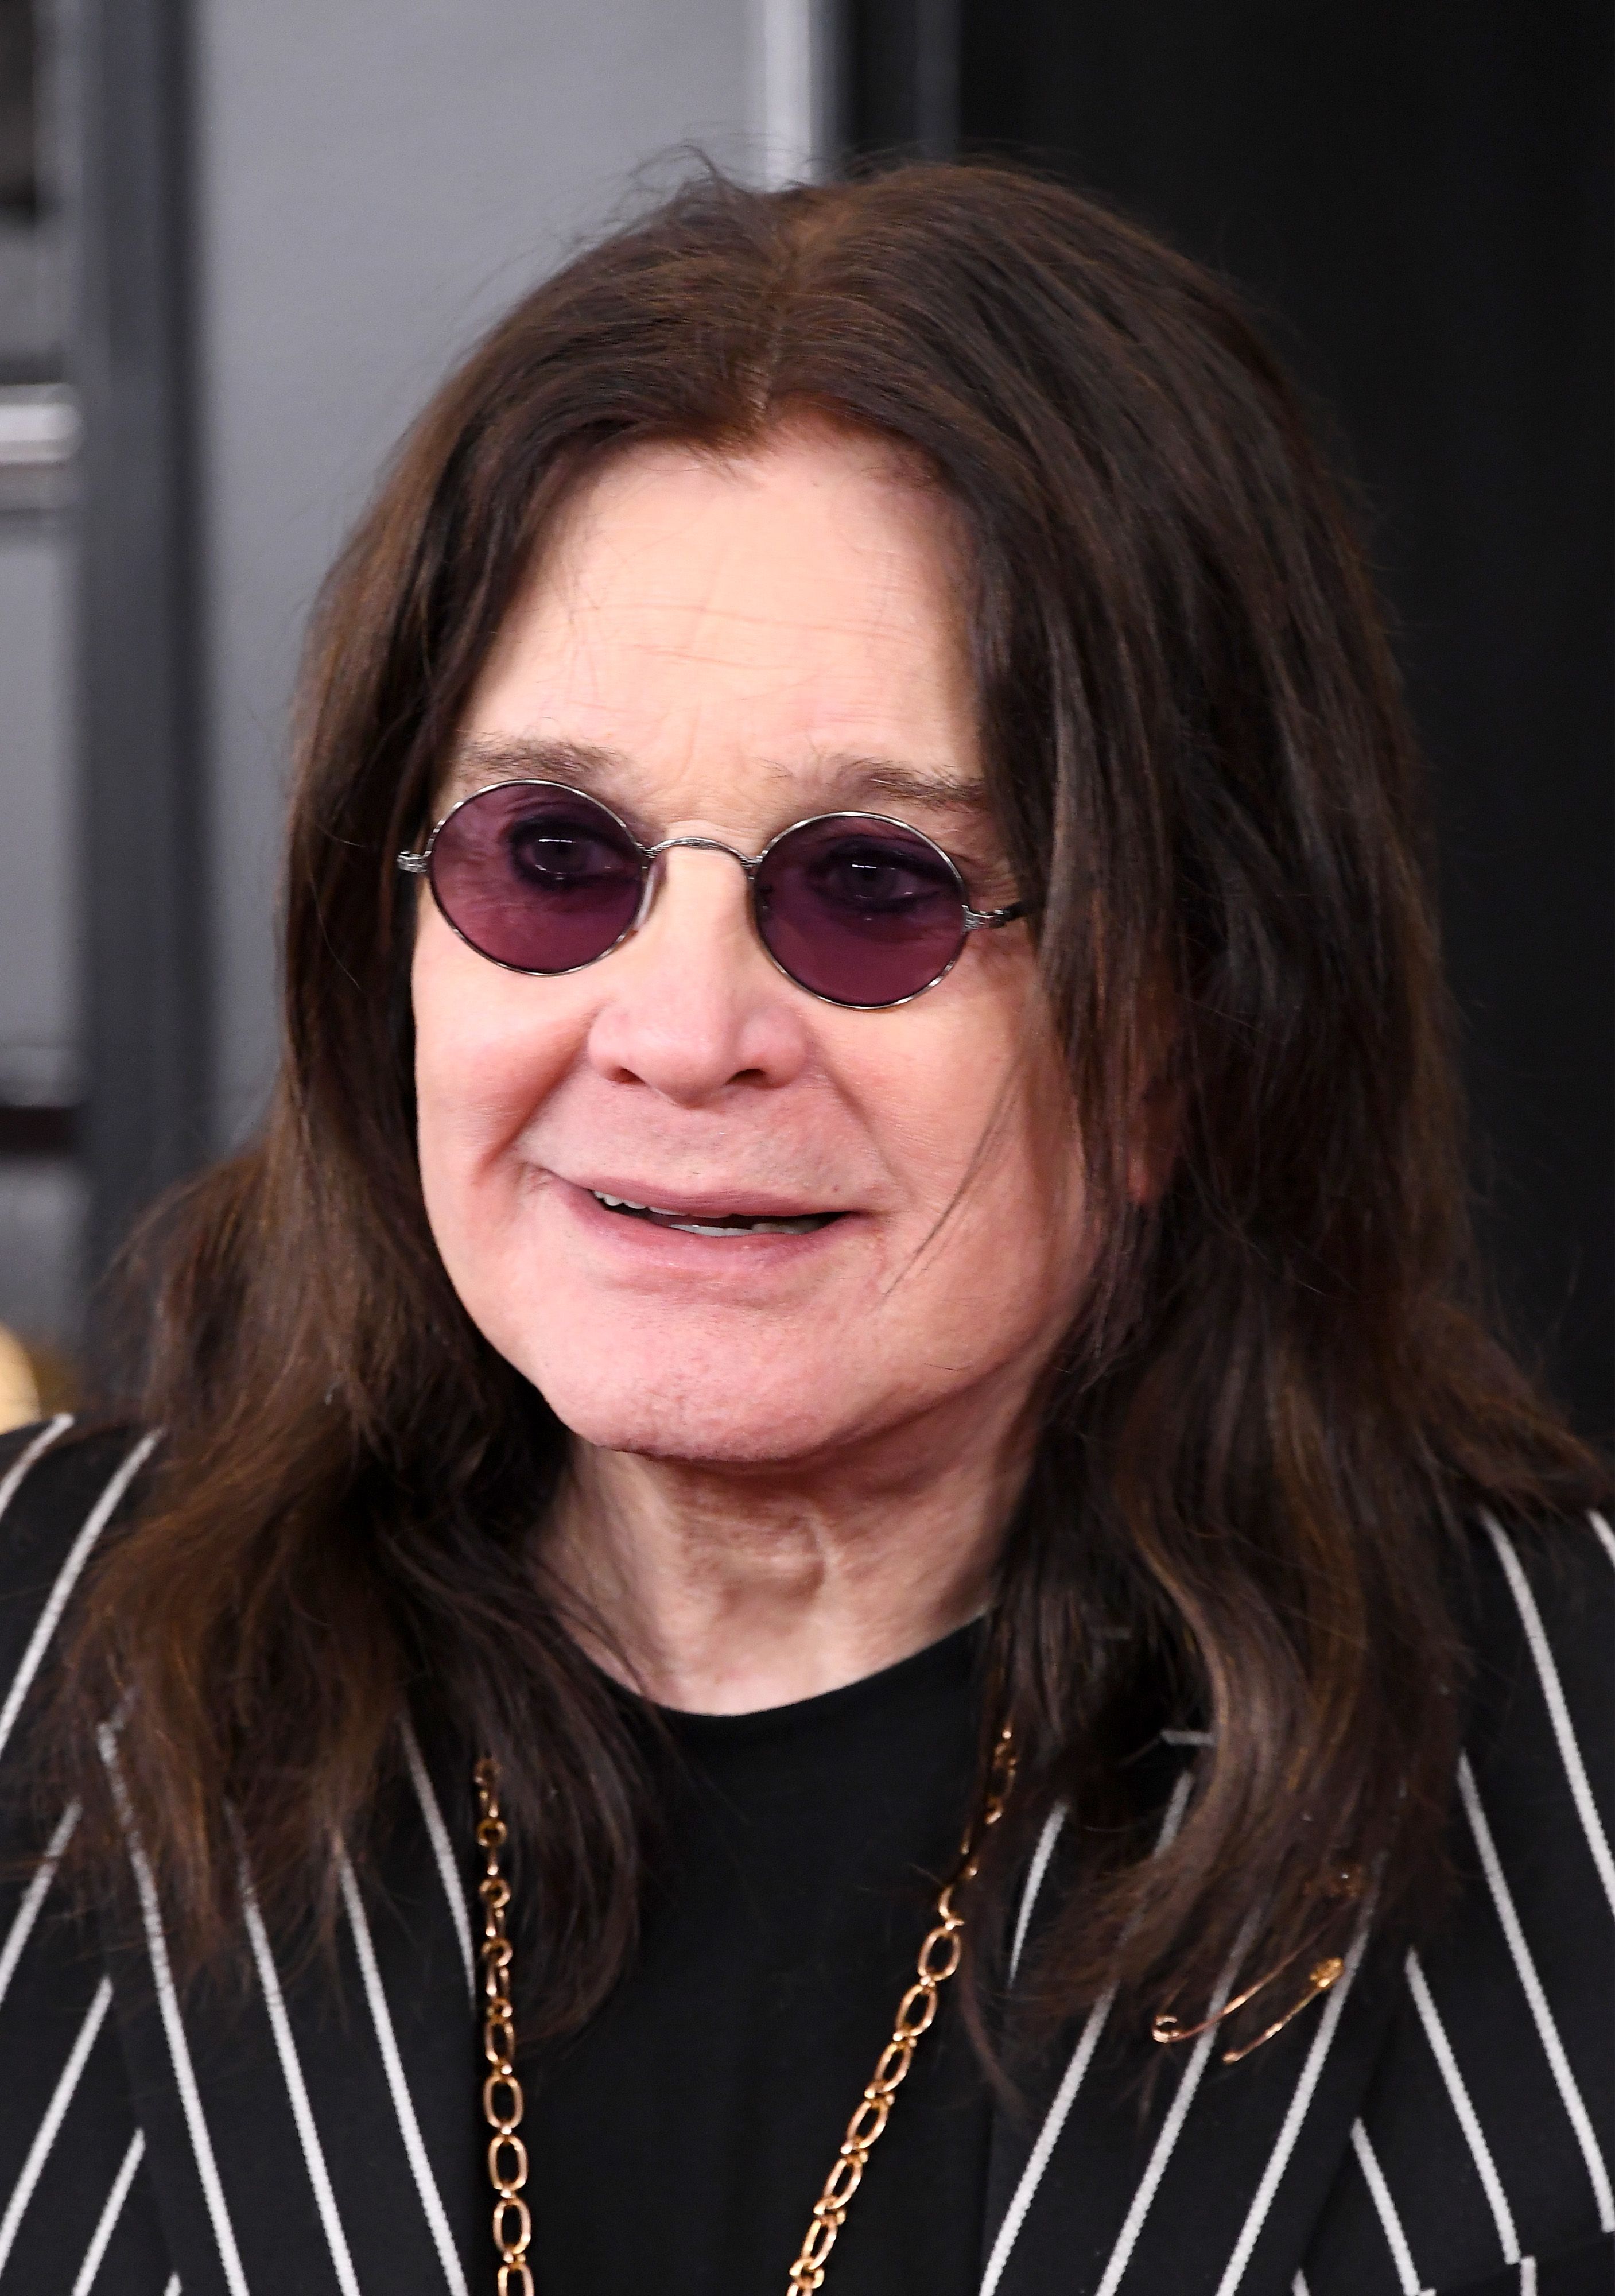 Ozzy Osbourne Details 'Agony' of Living With Parkinson's Disease